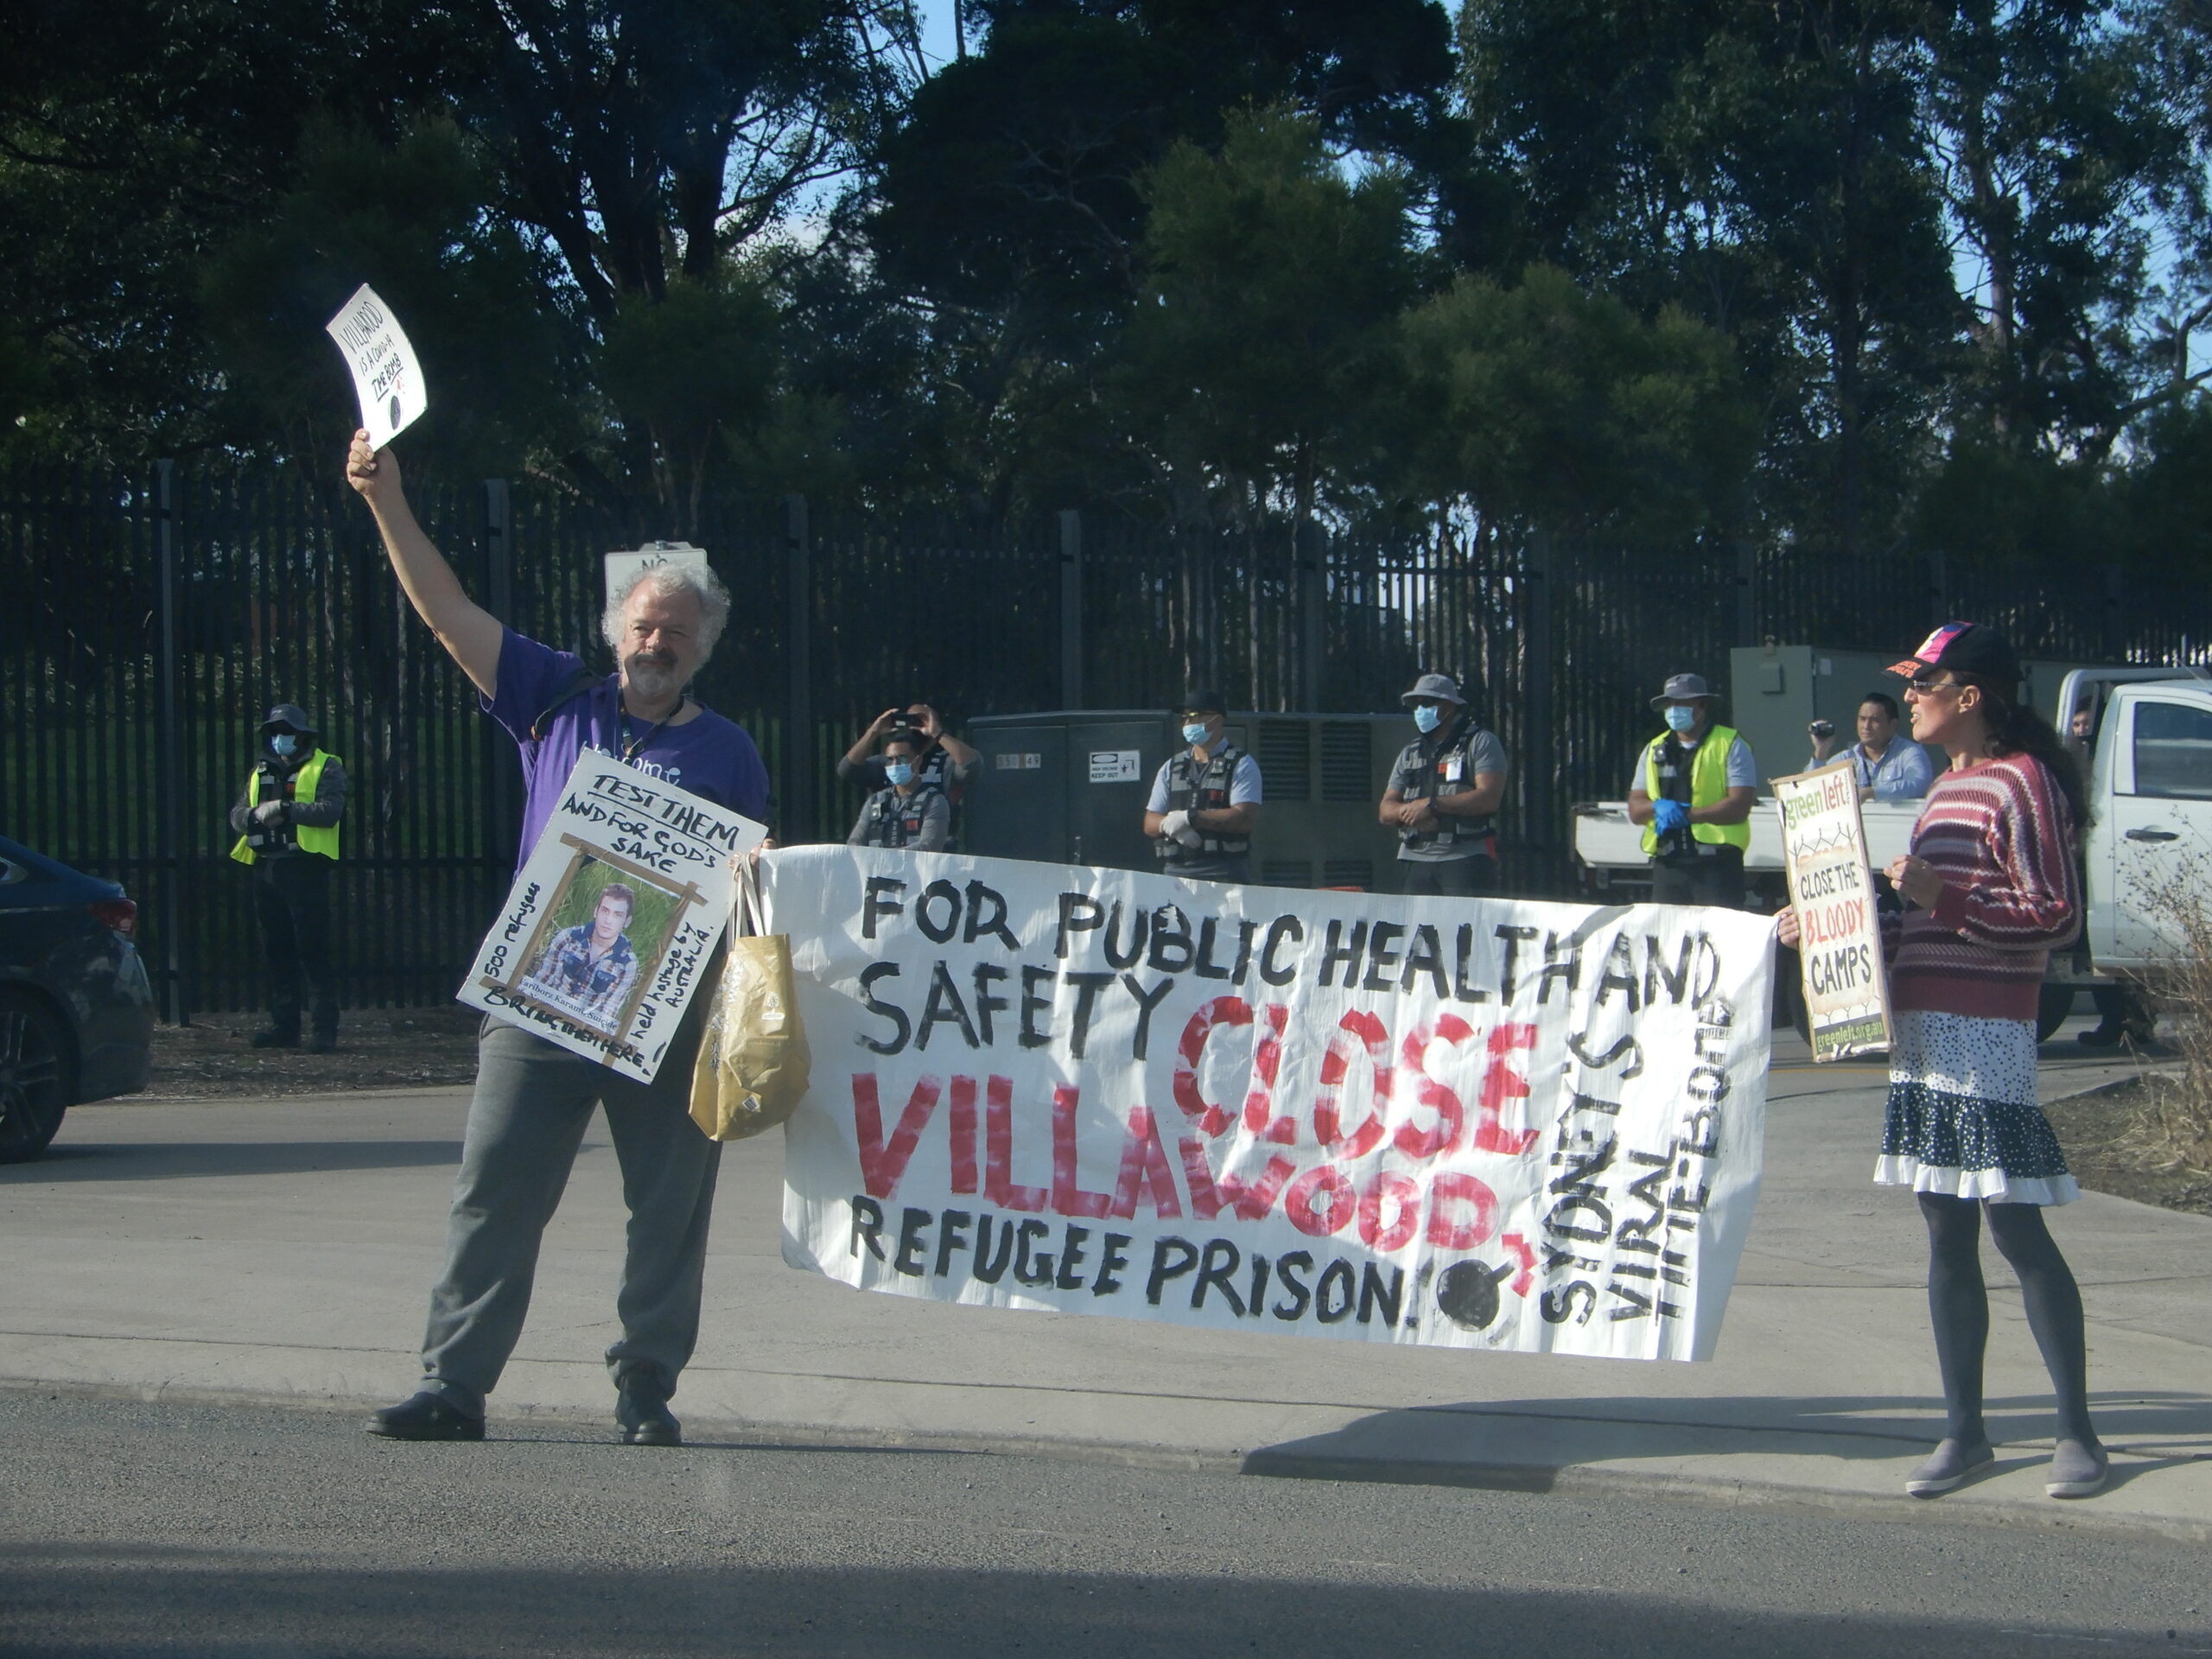 Protesters outside Villawood Detention Centre